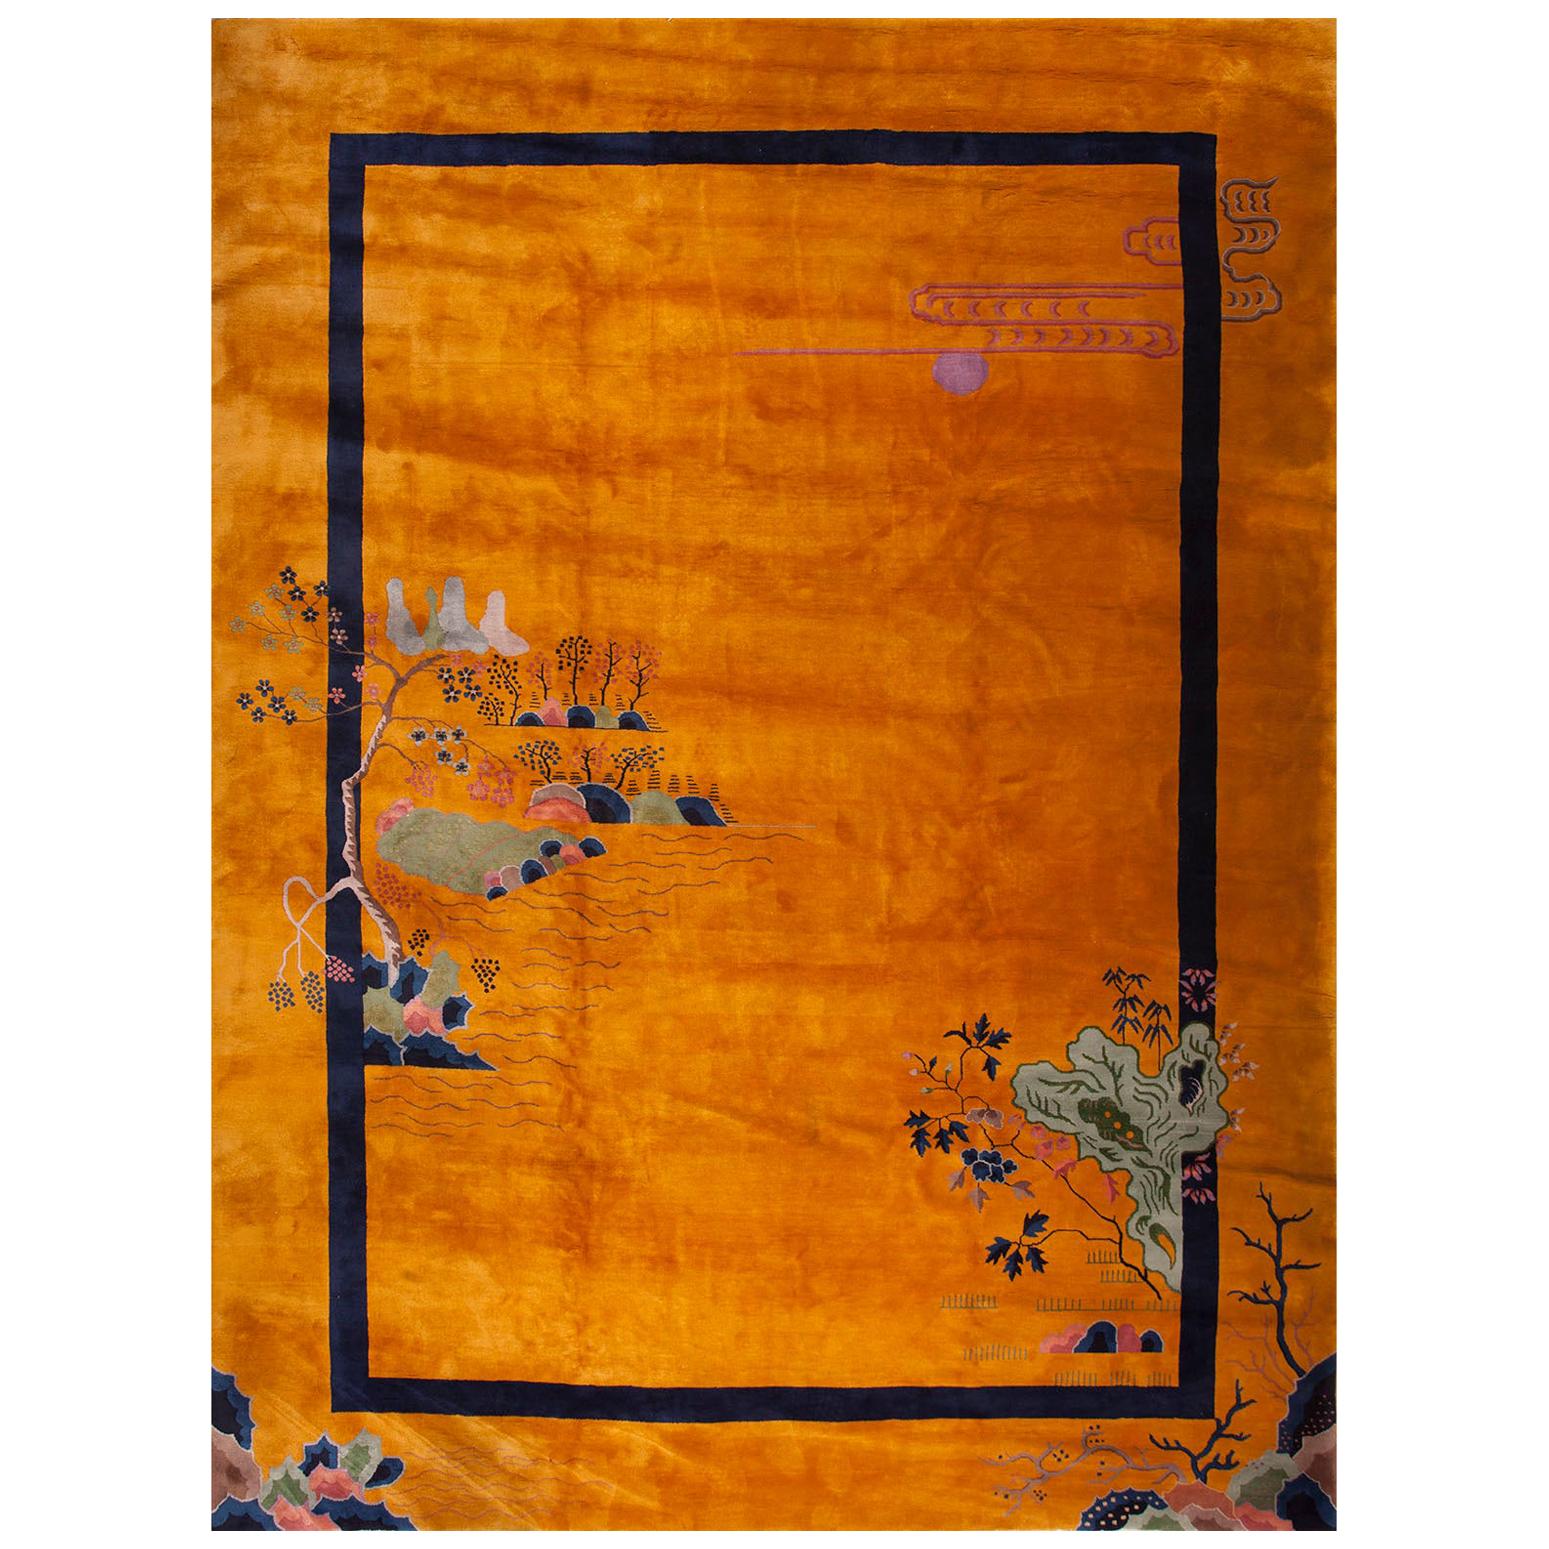 1920s Chinese Art Deco Carpet by Walter Nichols ( 11'2" x 15'4" - 340 x 467 ) For Sale